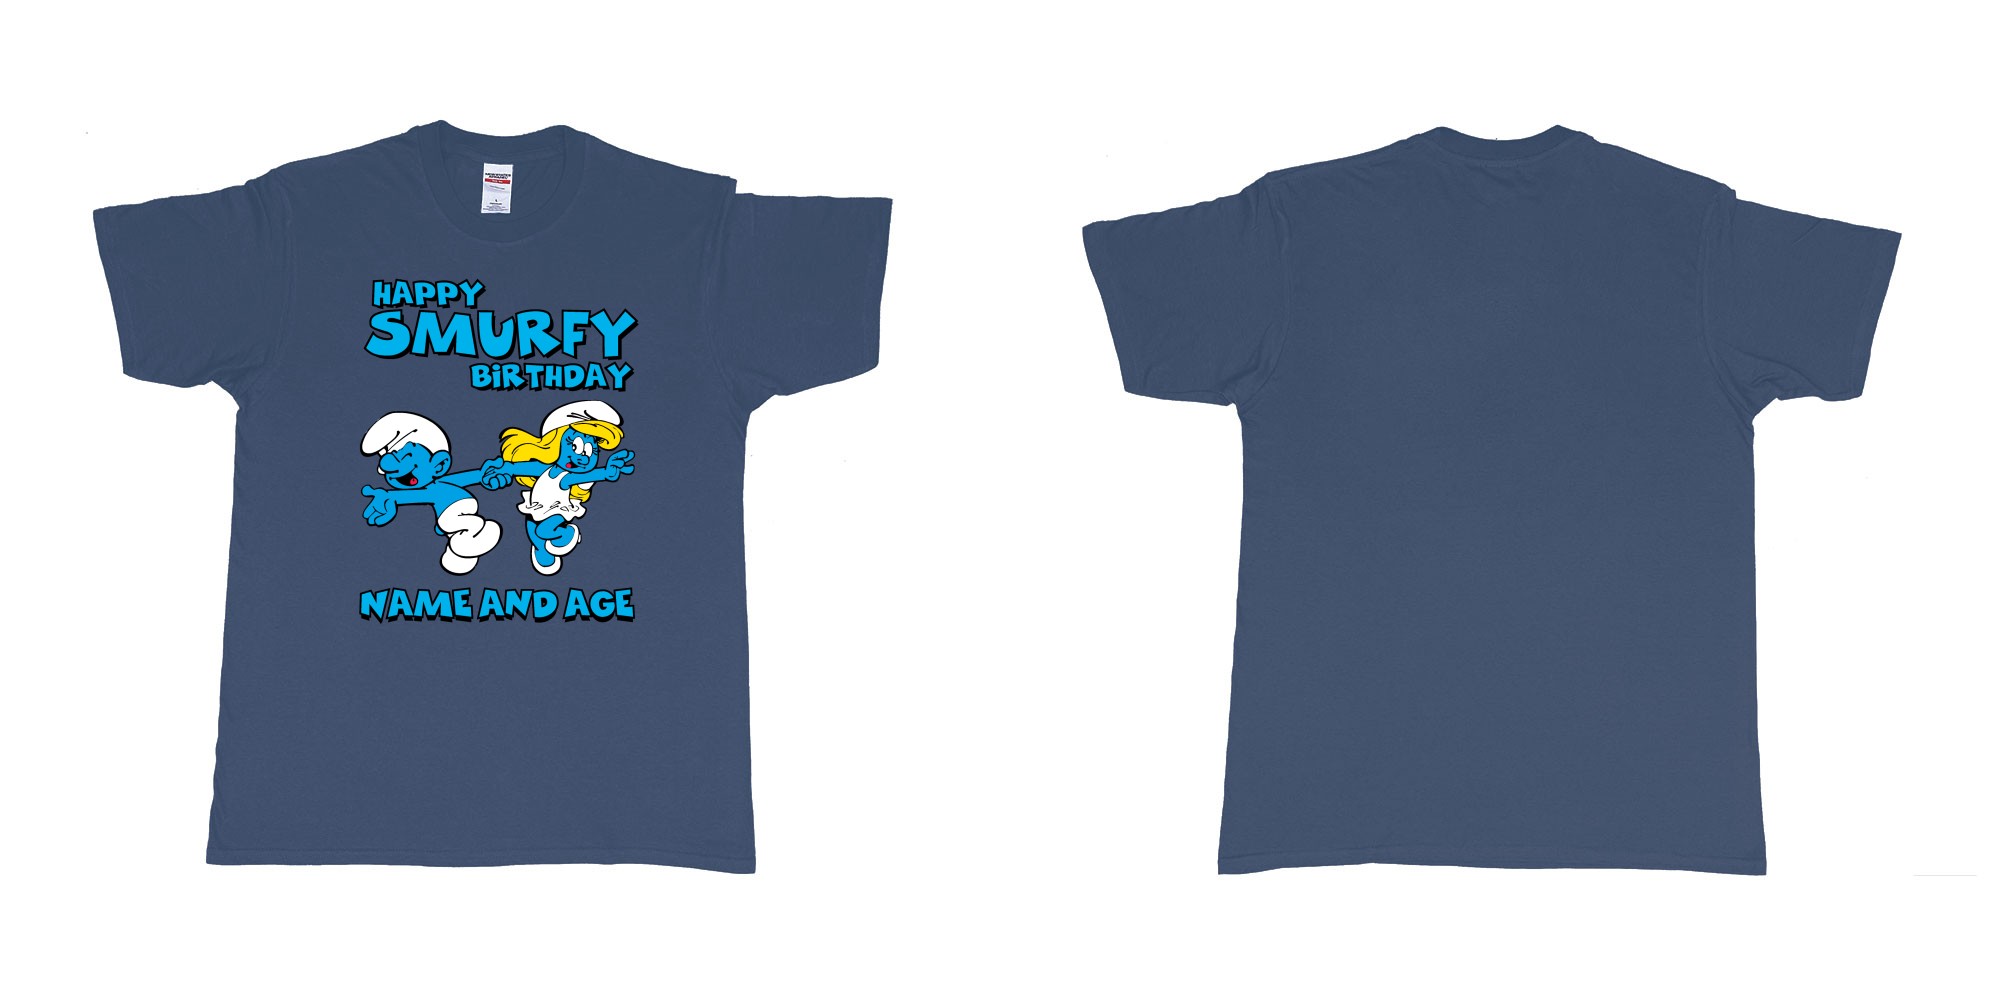 Custom tshirt design happy smurfy birthday in fabric color navy choice your own text made in Bali by The Pirate Way